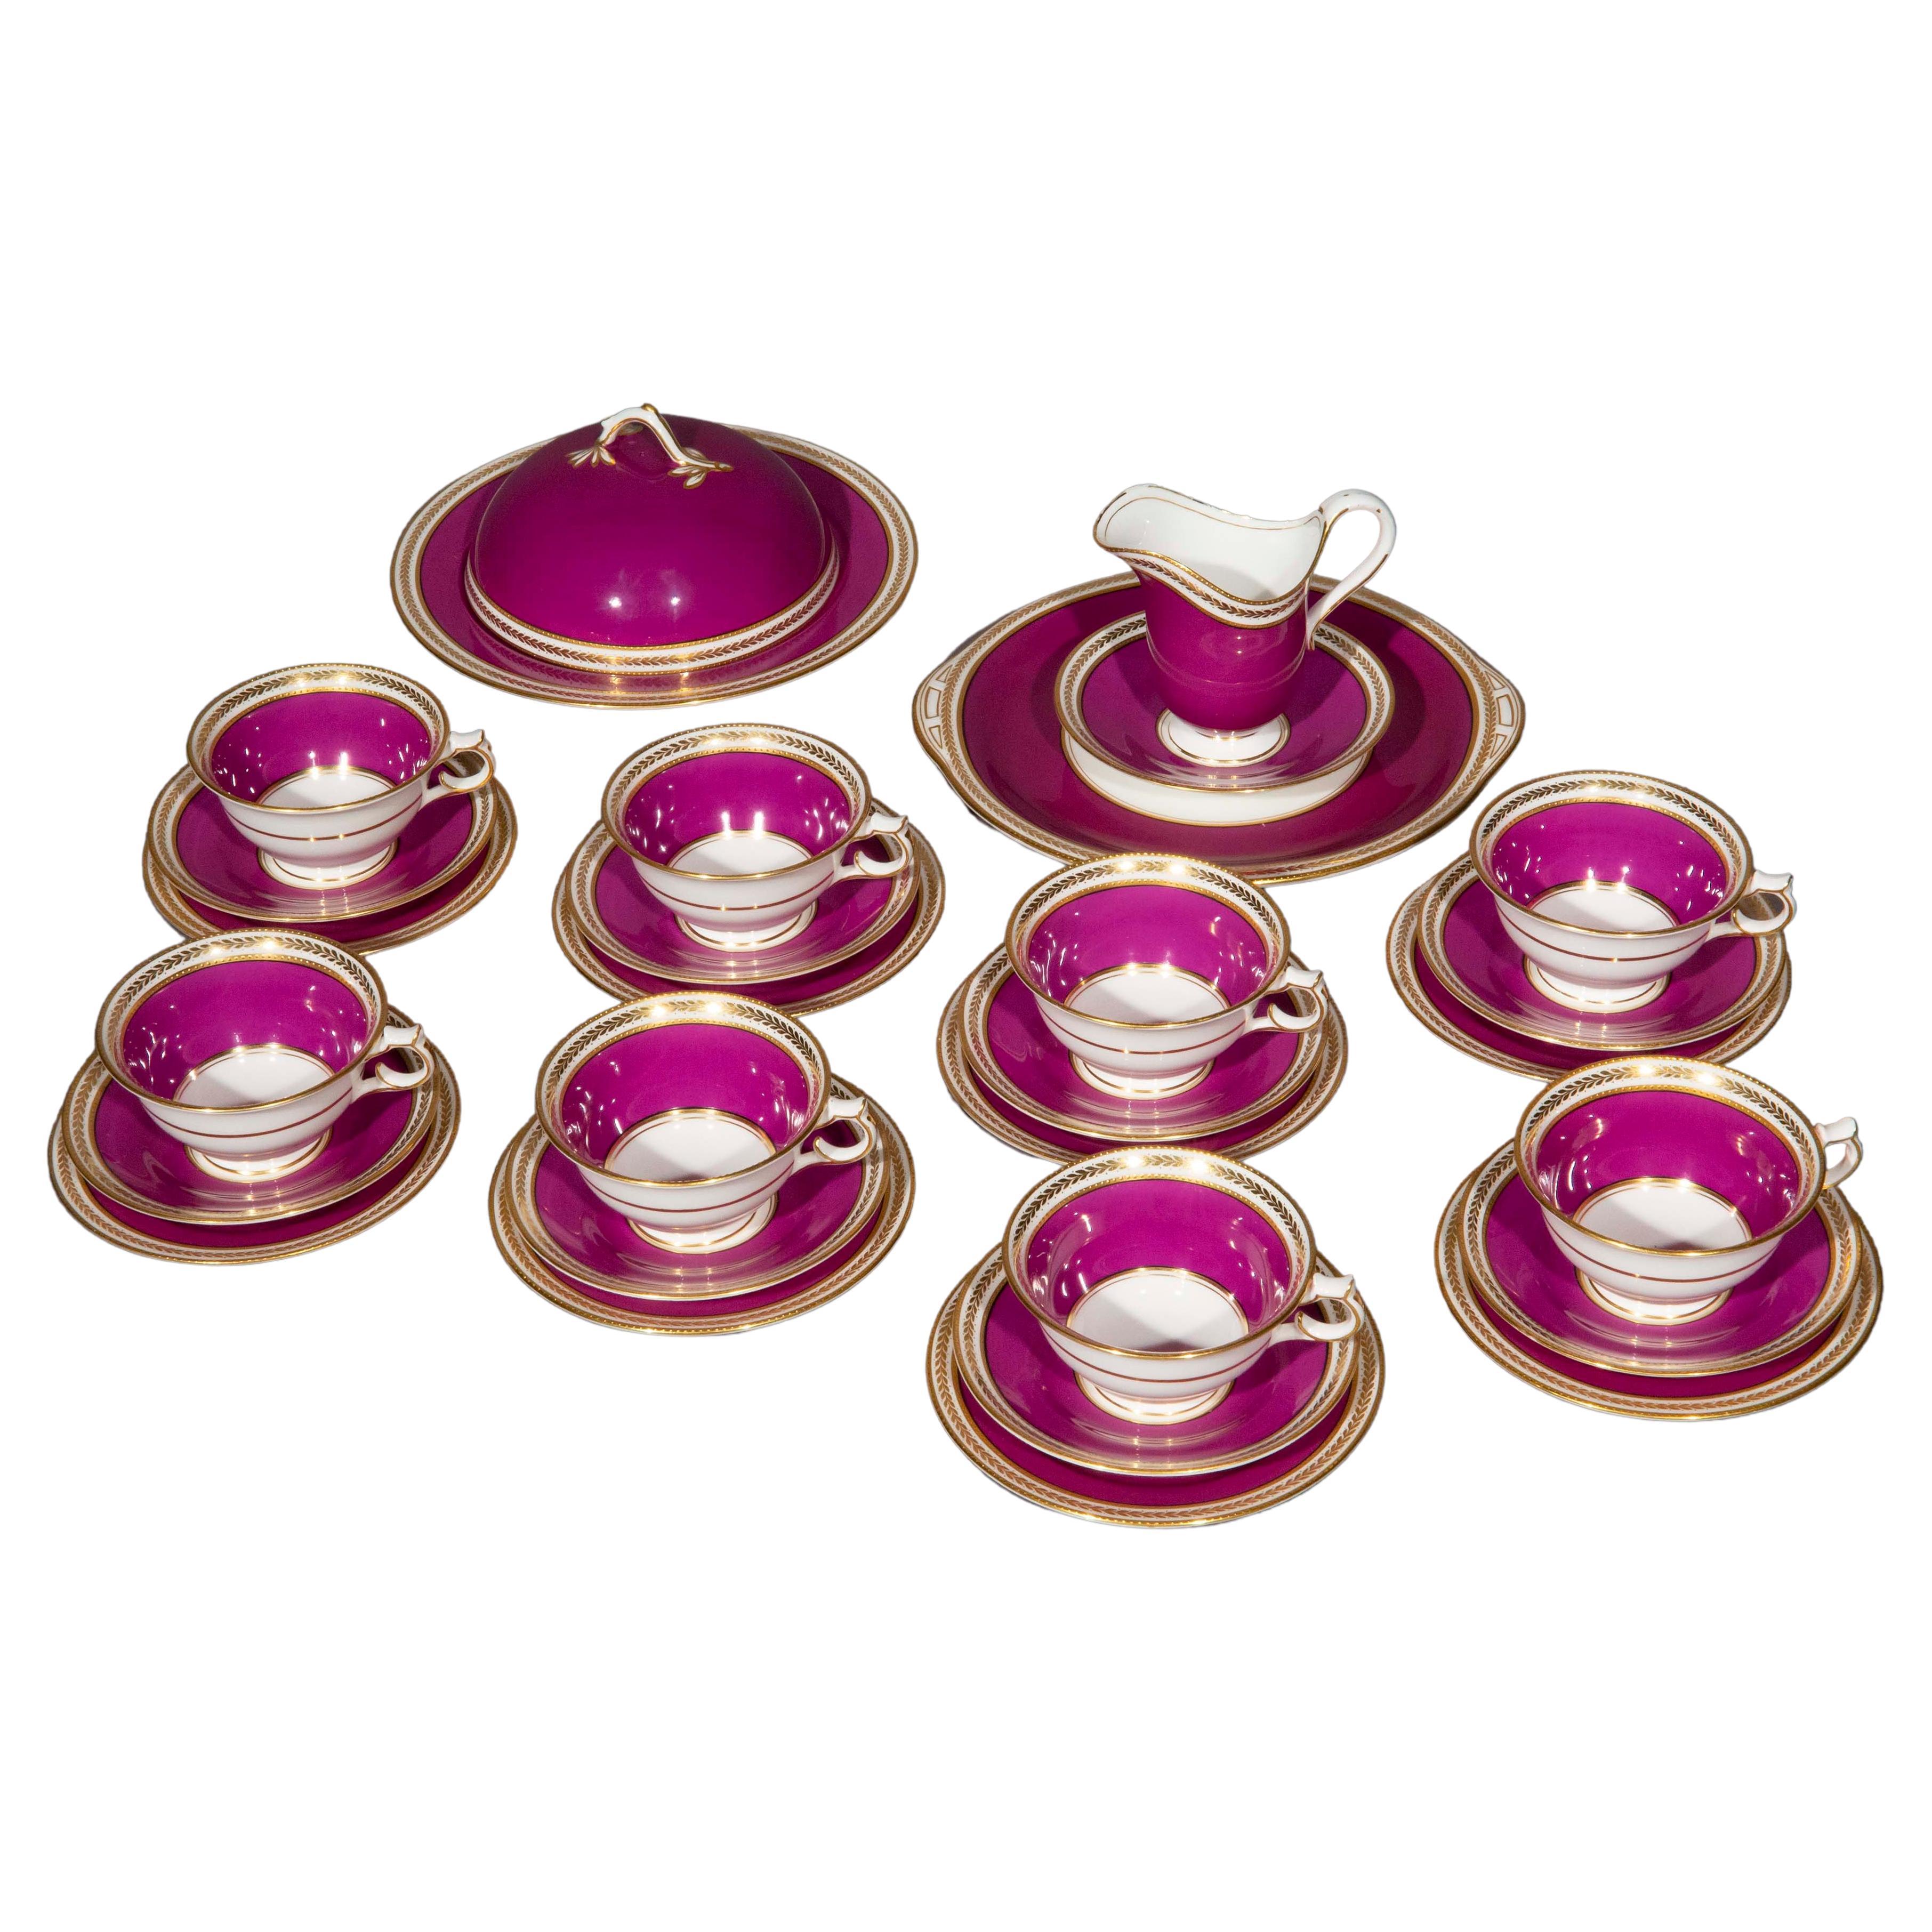 Antique Purple and Gold Porcelain Tea Set for Eight Persons